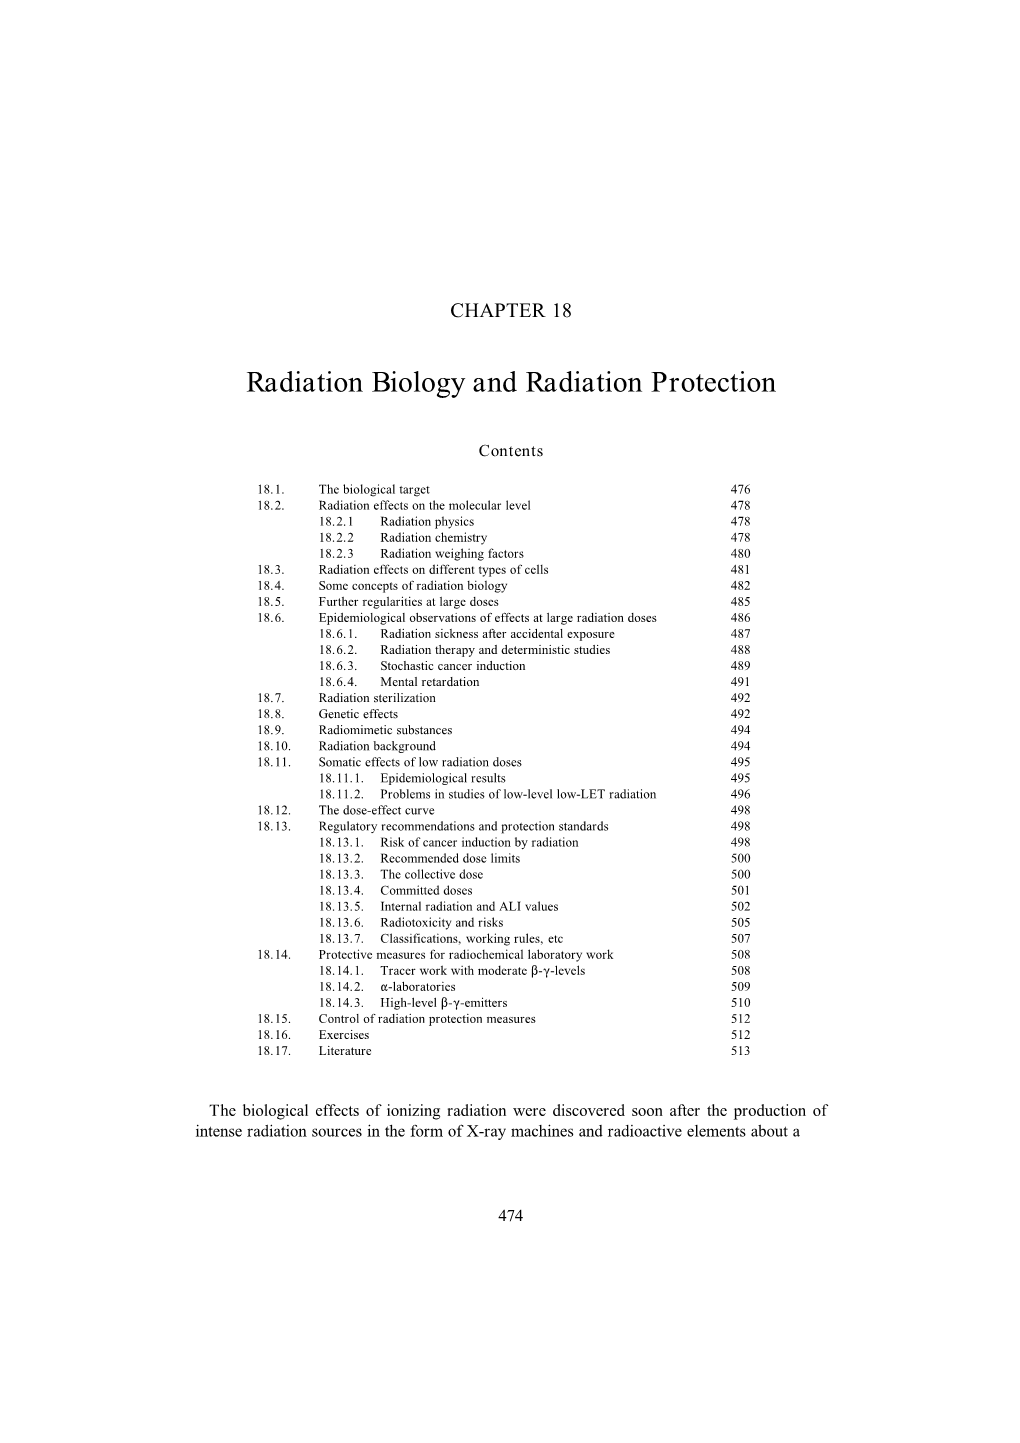 Radiation Biology and Radiation Protection